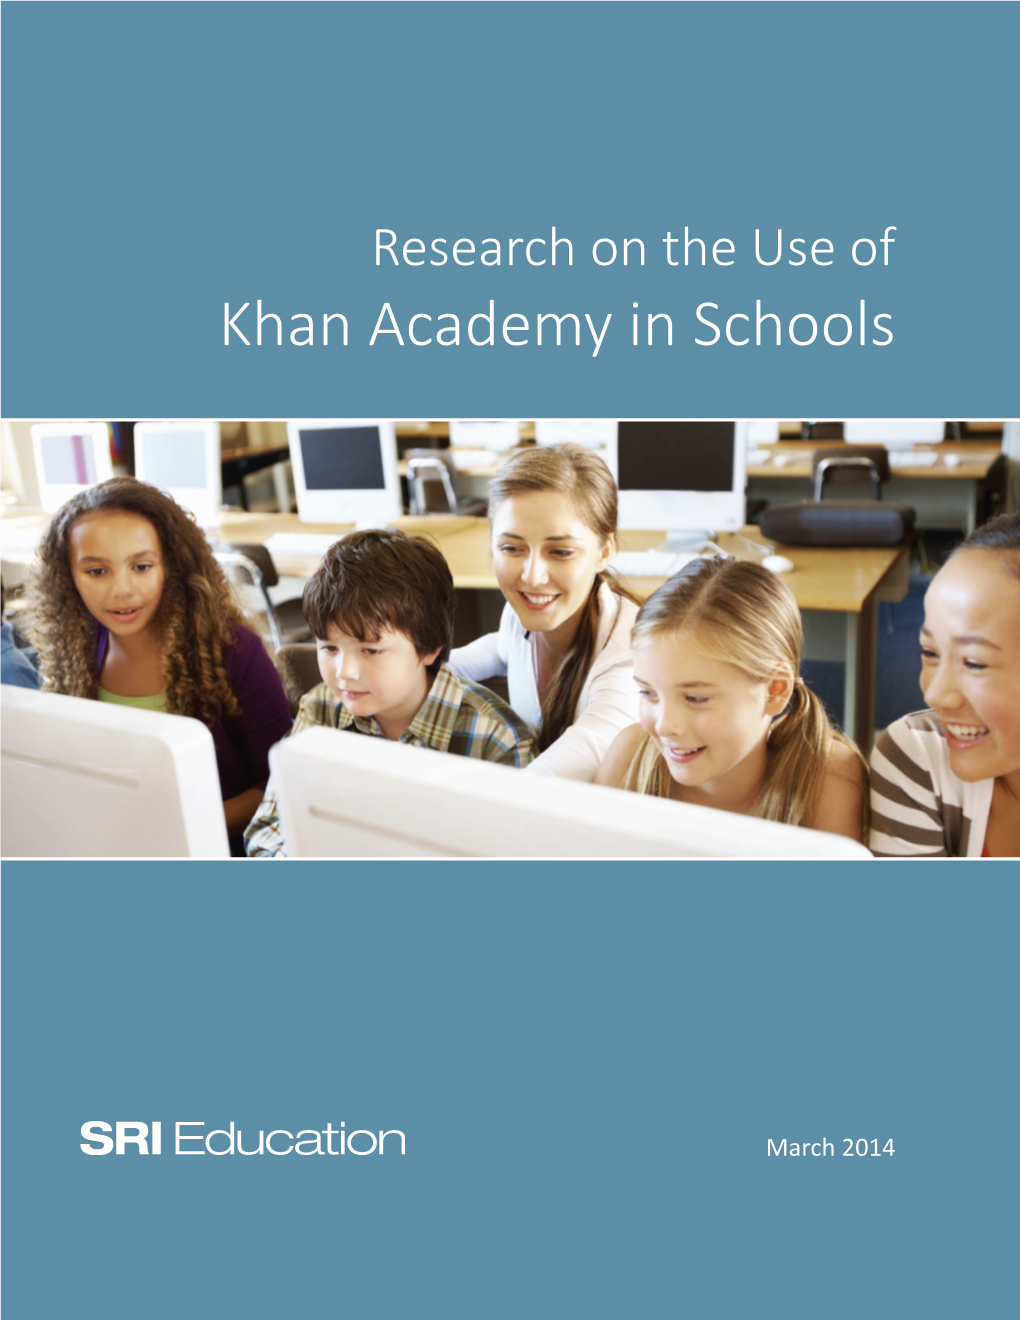 Research on the Use of Khan Academy in Schools